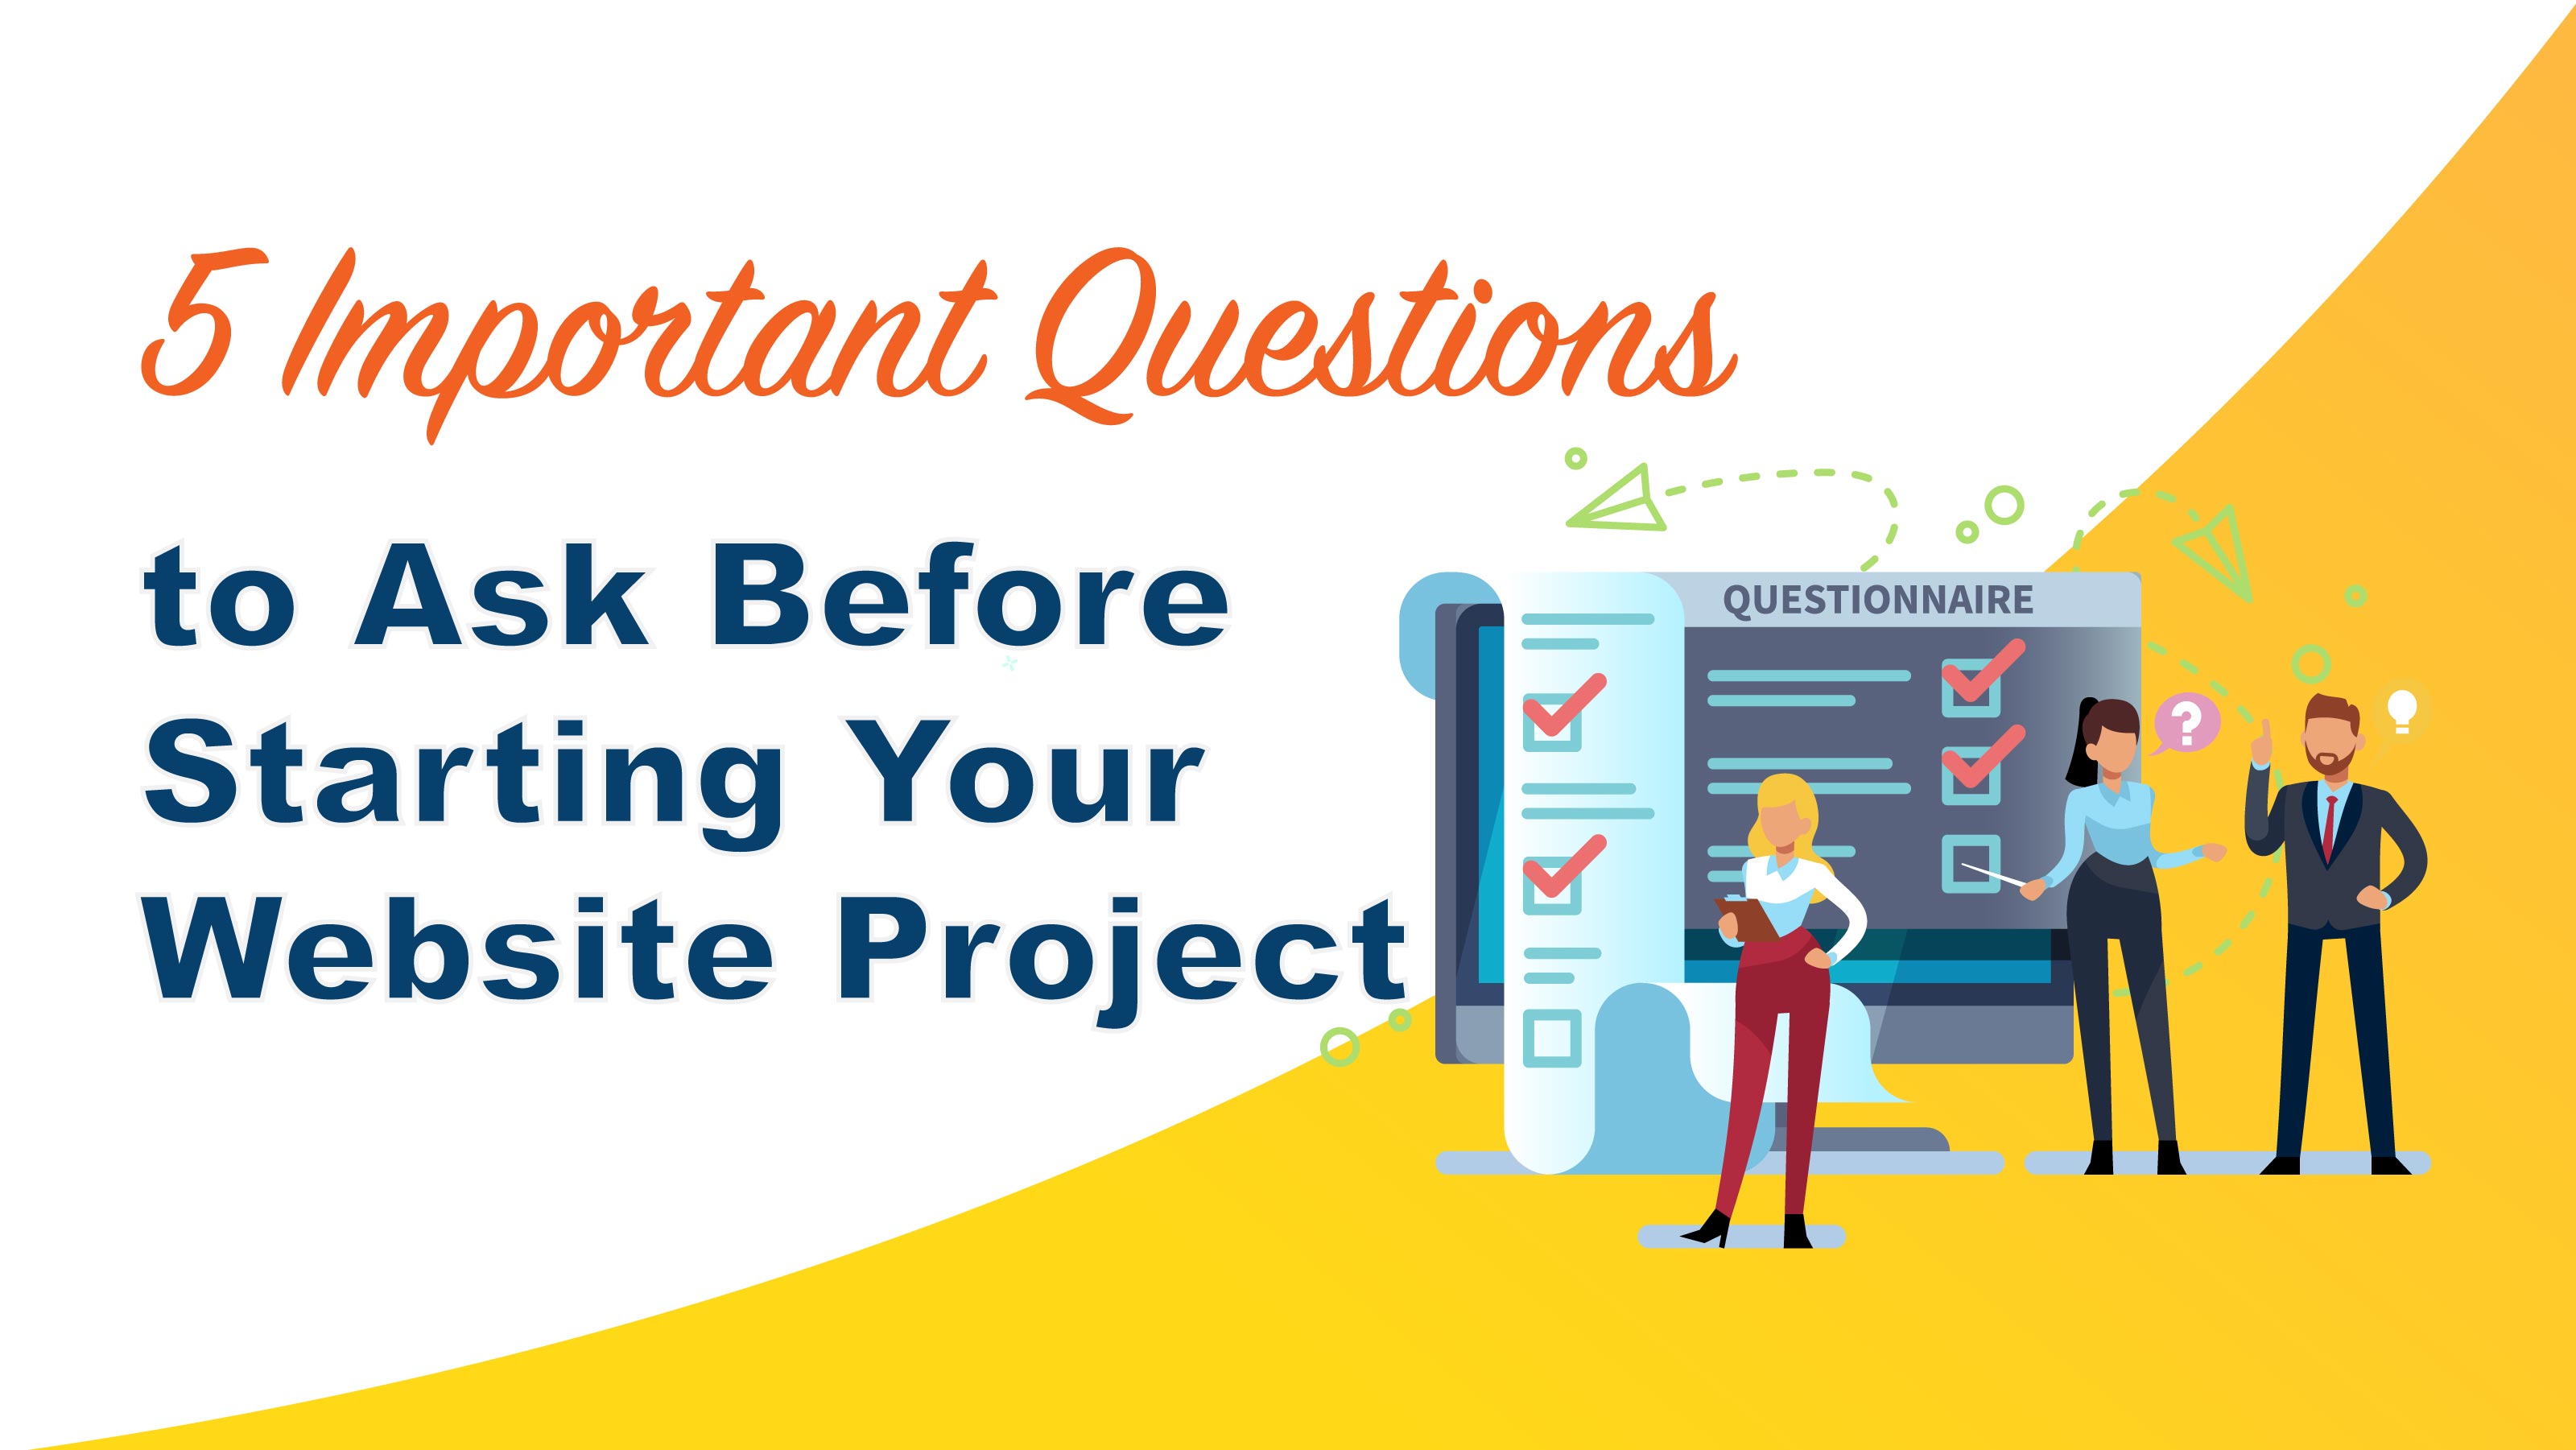 5 Important Questions to Ask Before Starting Your Website Project